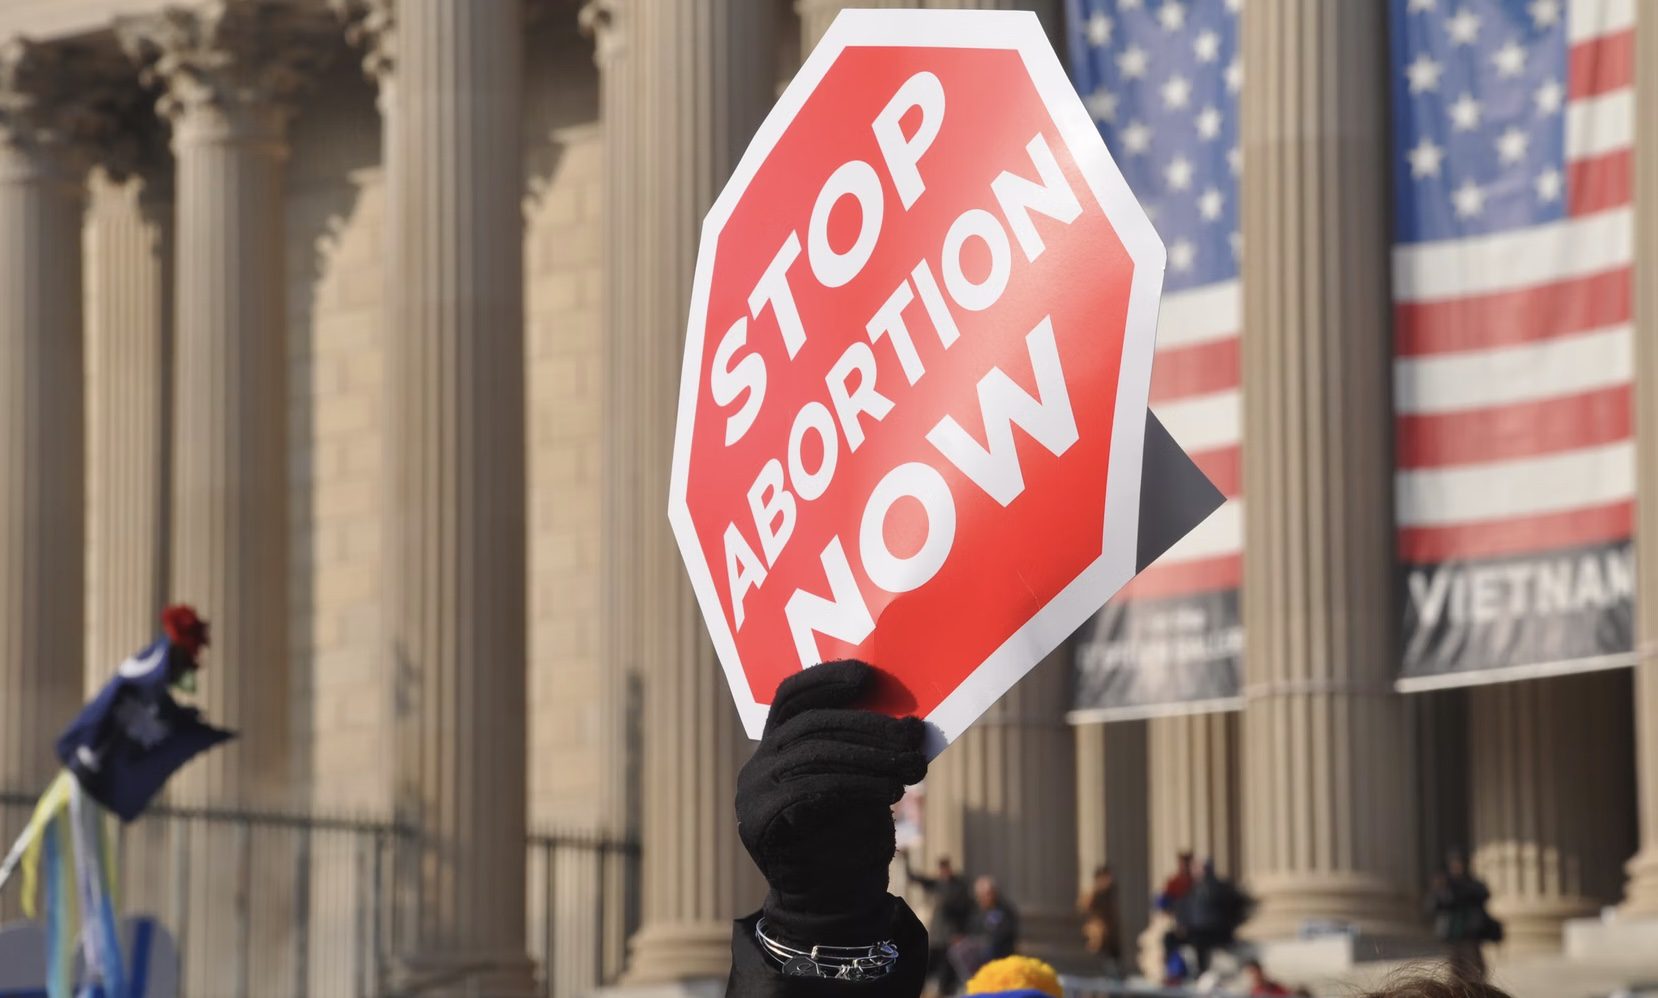 Indiana Senate Votes 'Yes' on Near-Total Abortion Ban in Special Weekend Session